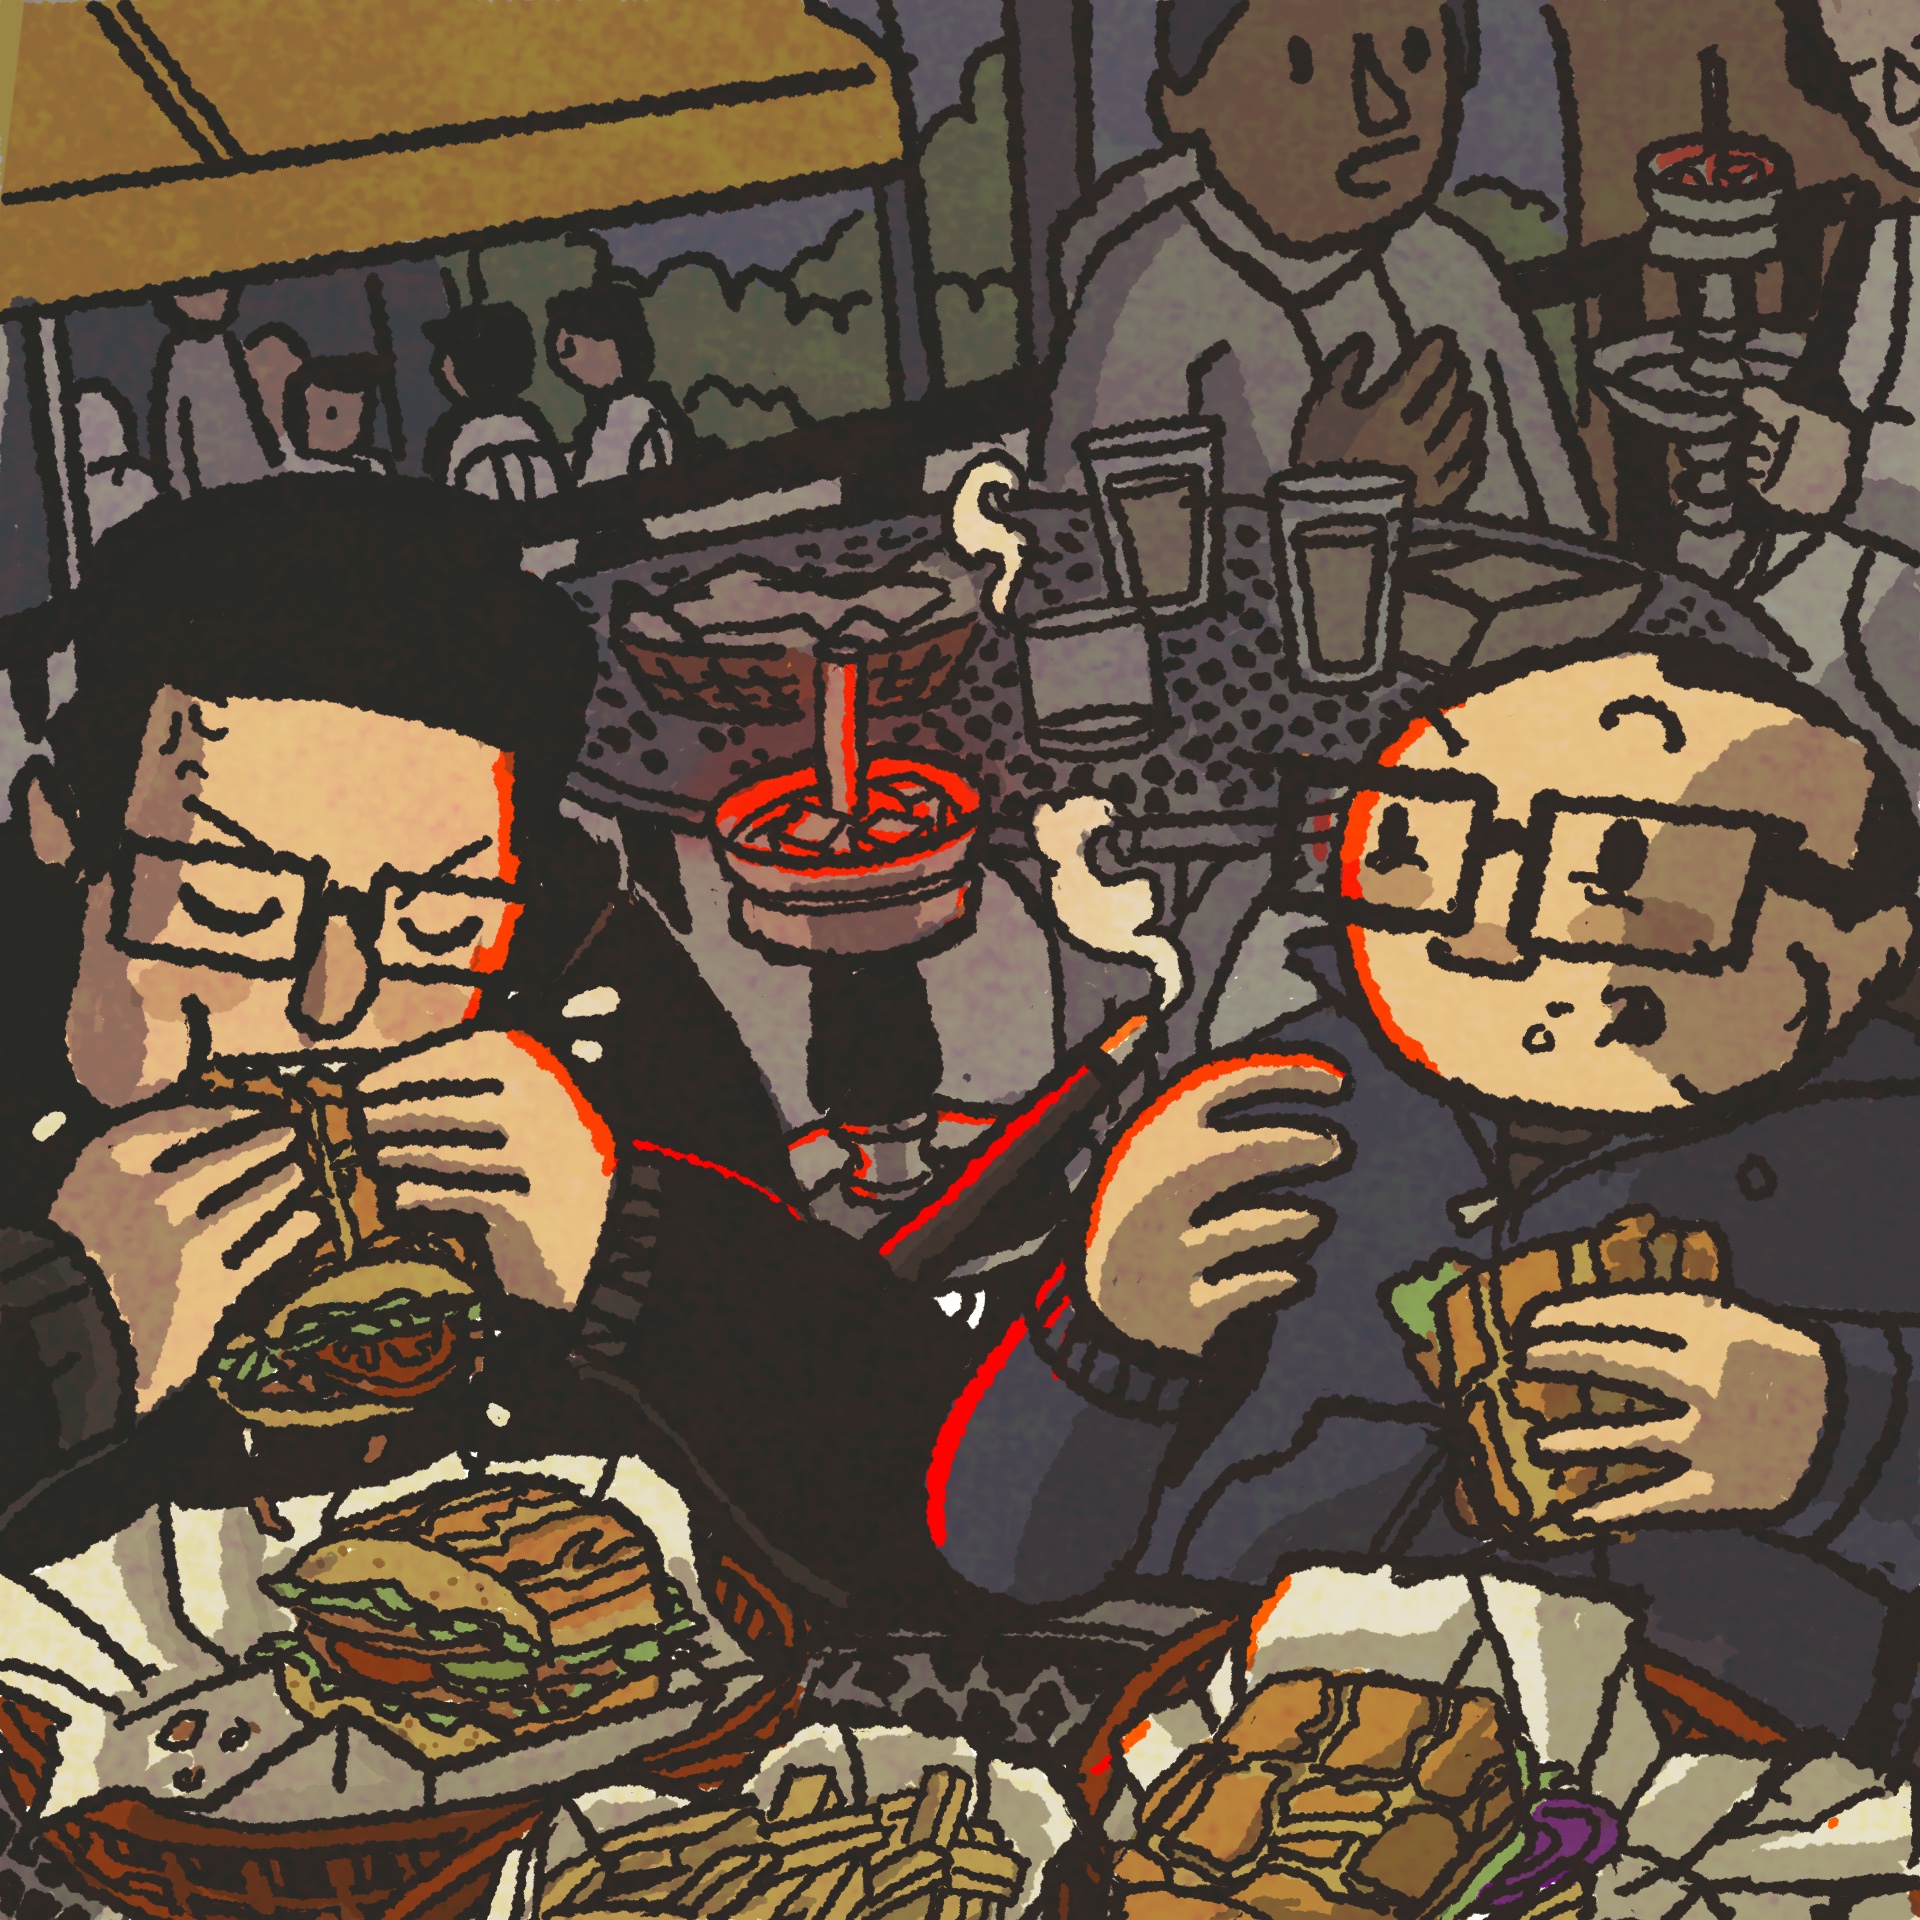 Illustration: two men eat sandwiches on Dutch Crunch bread while a hookah pipe lets off a wisp of smoke behind them.